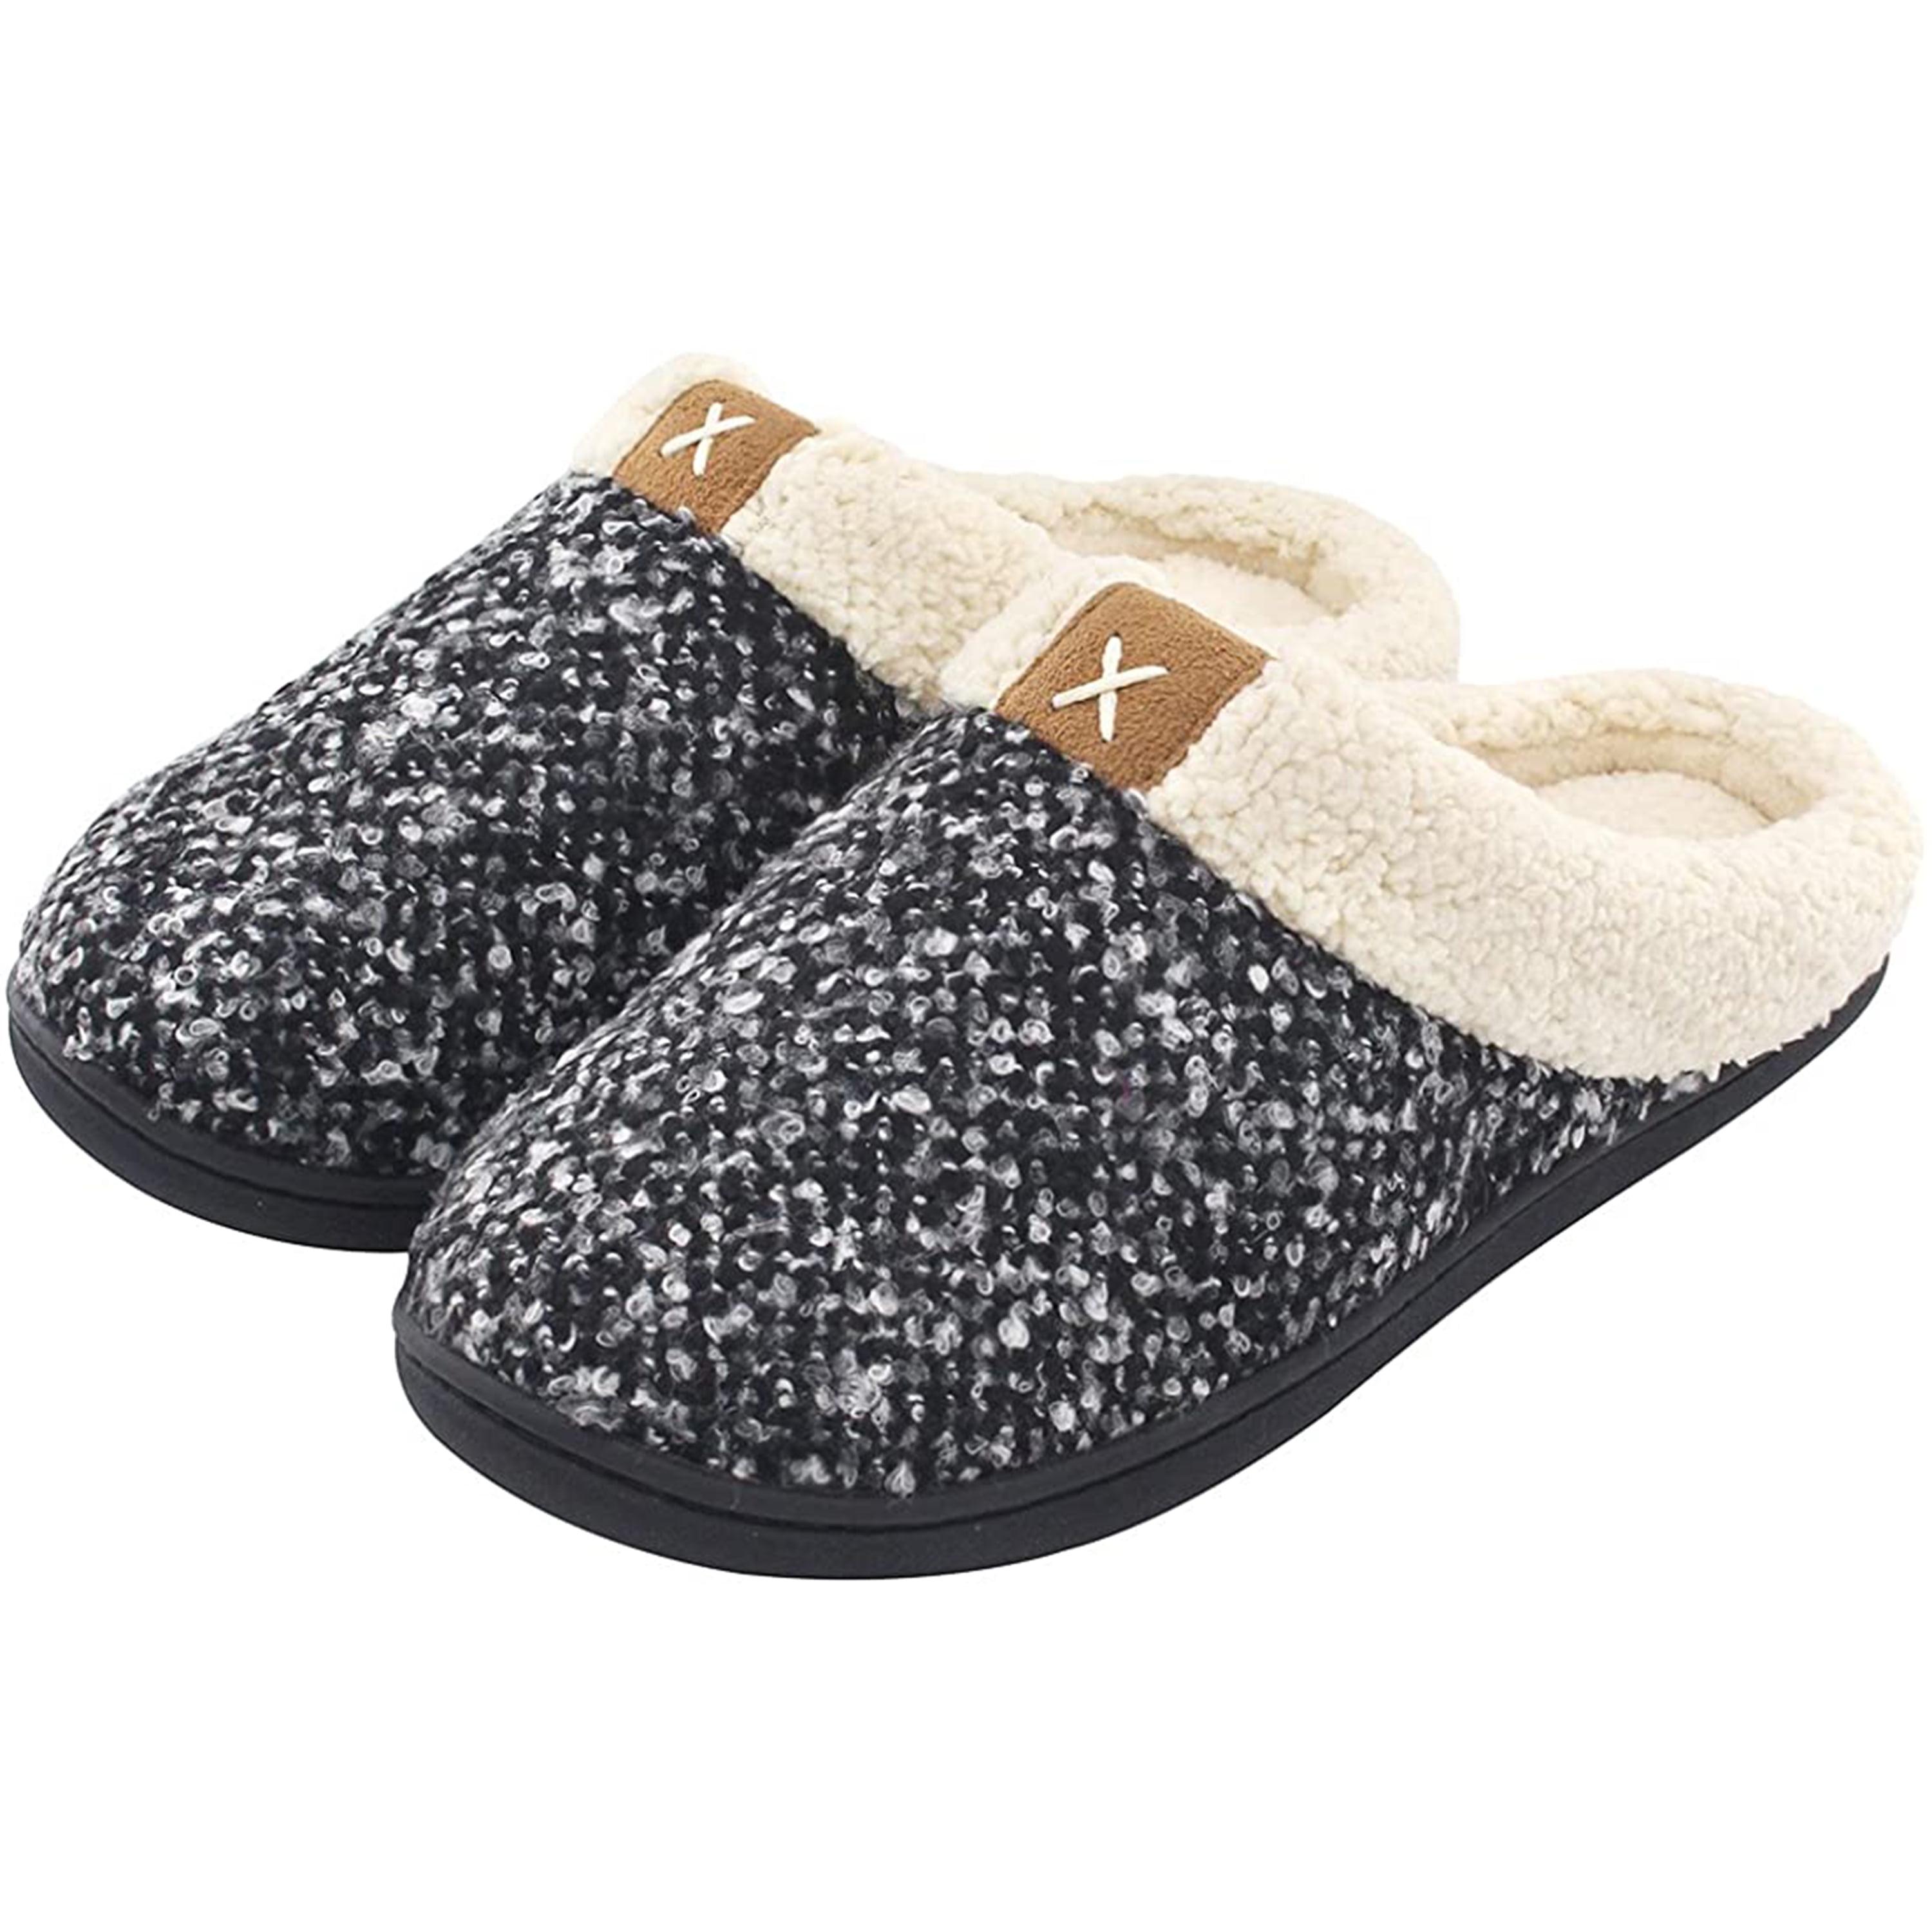 Homitem House Slippers for Women Indoor and Outdoor Fuzzy Slippers Women with Memory Foam Bedroom Warm Fluffy Slippers for Women With Arch Support 